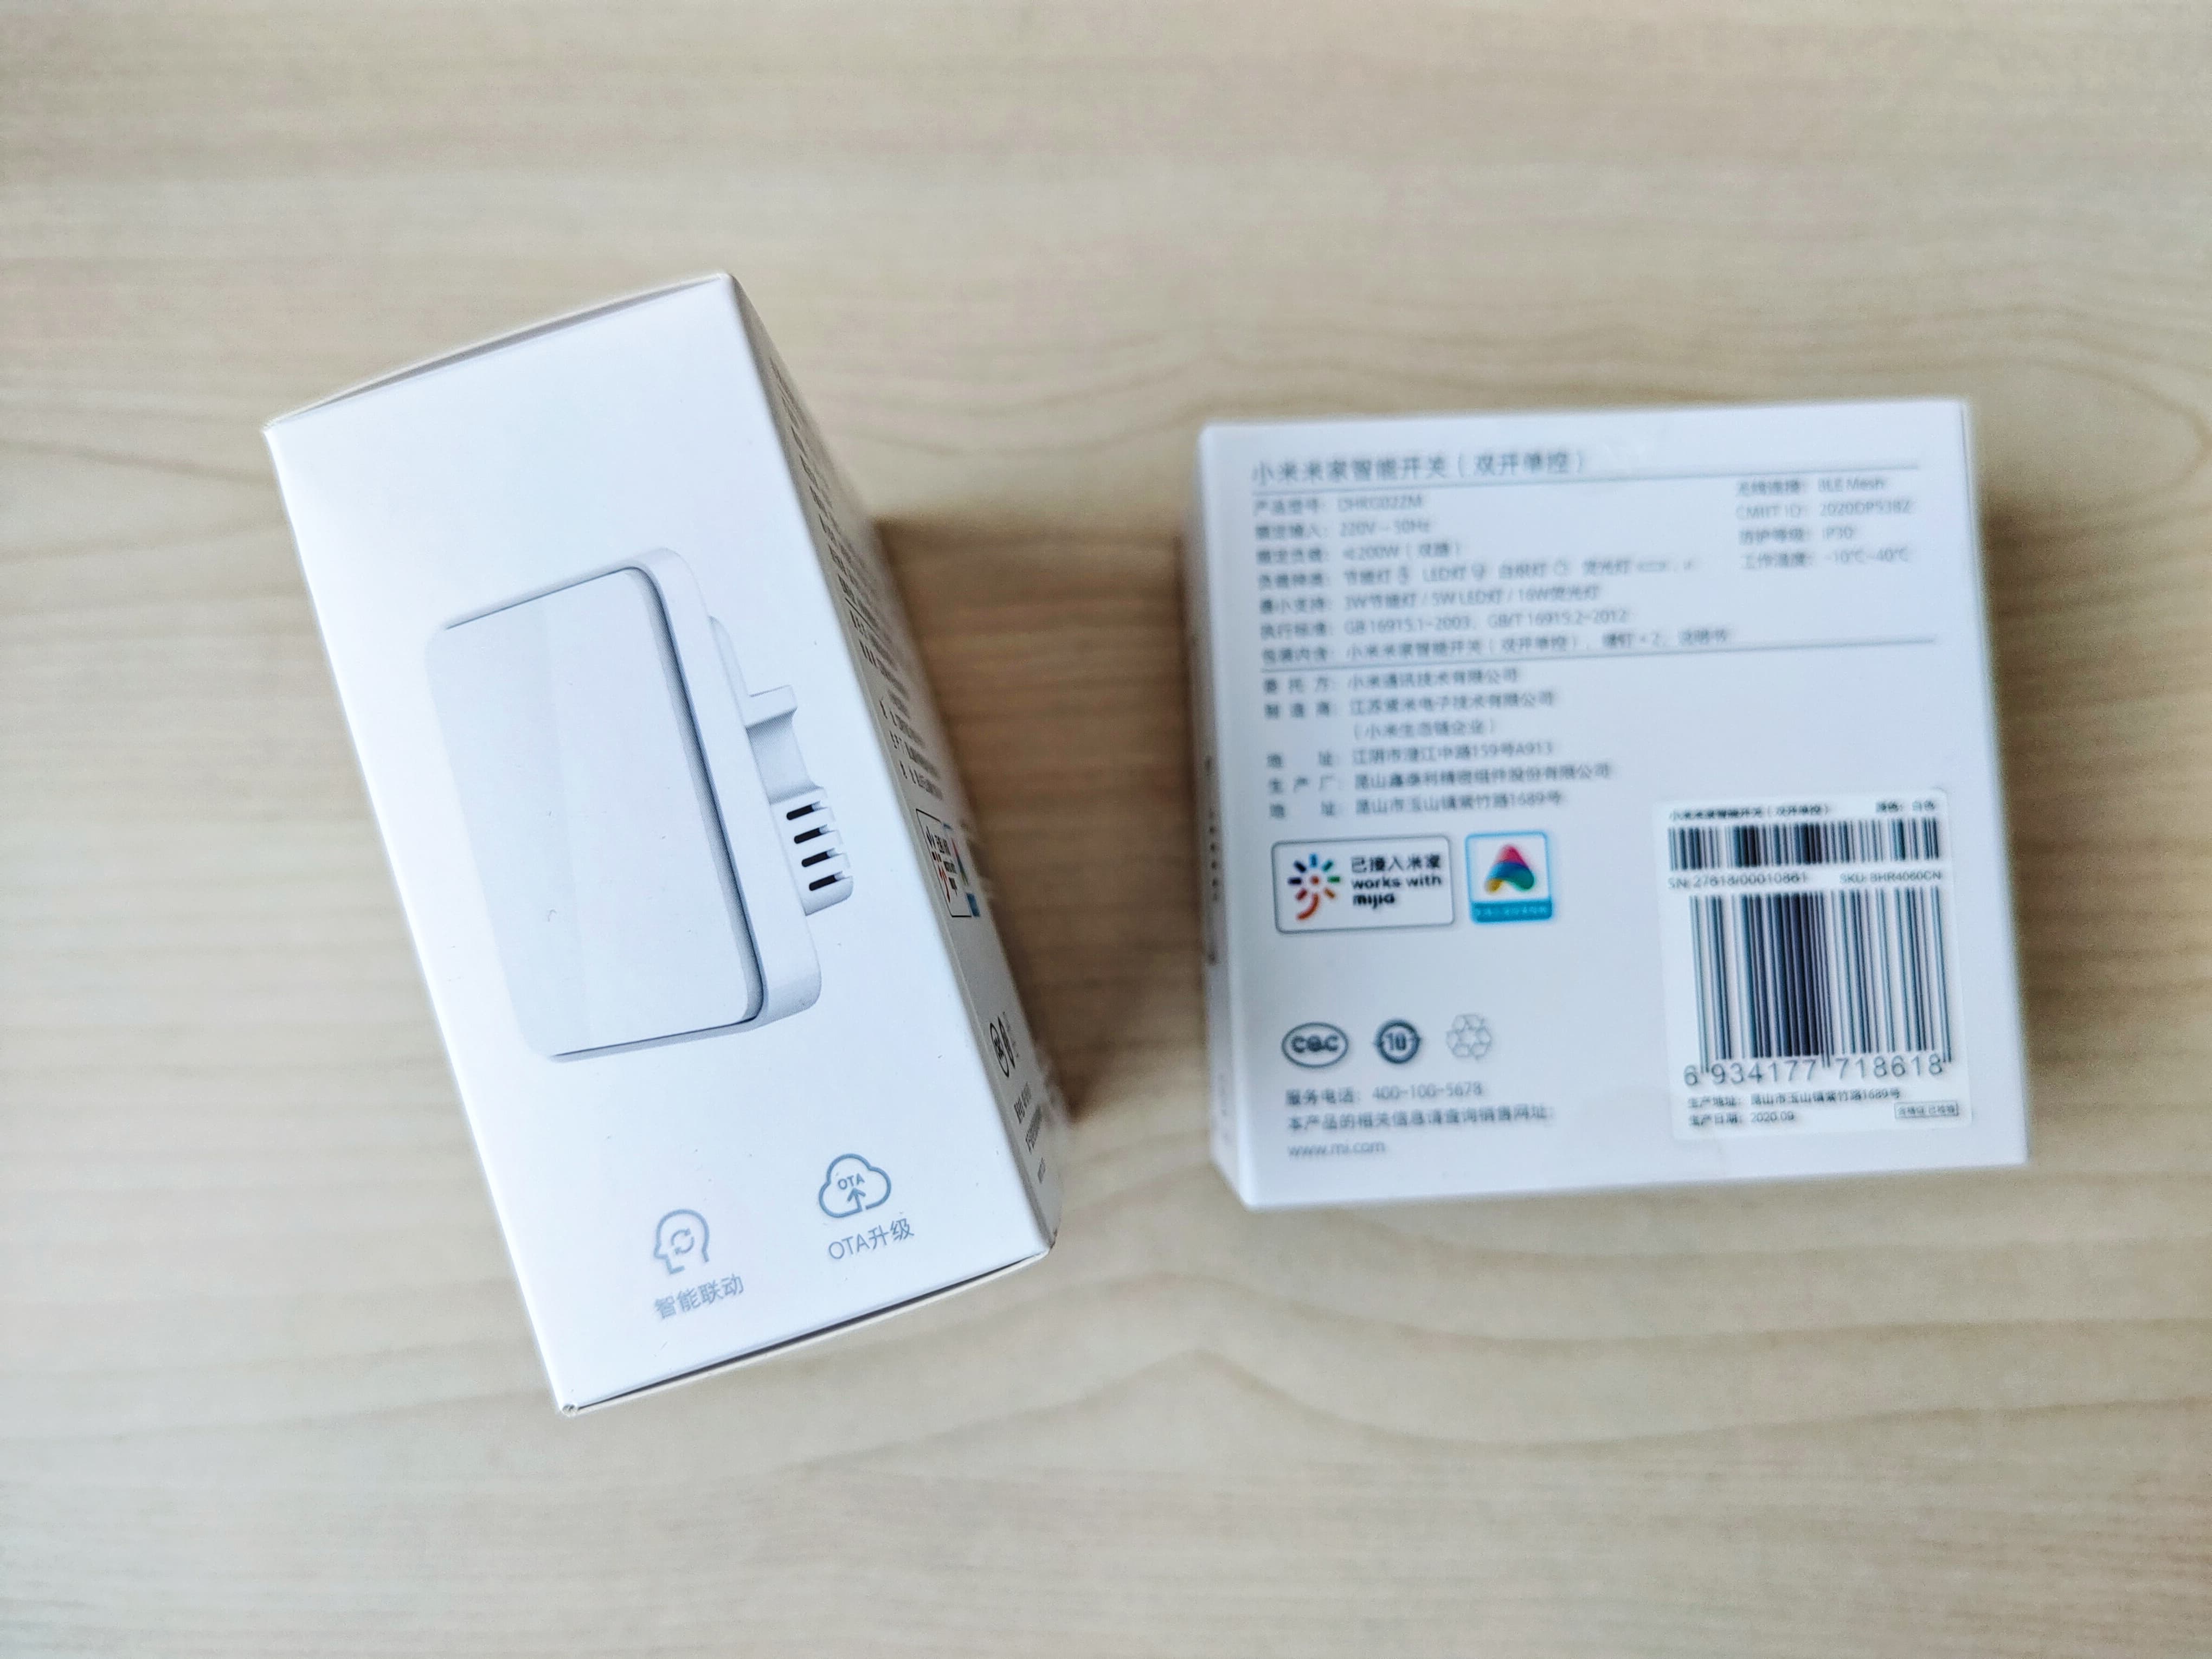 Mijia Smart Switch Picture Tour: 49 yuan is enough to make lamps smart